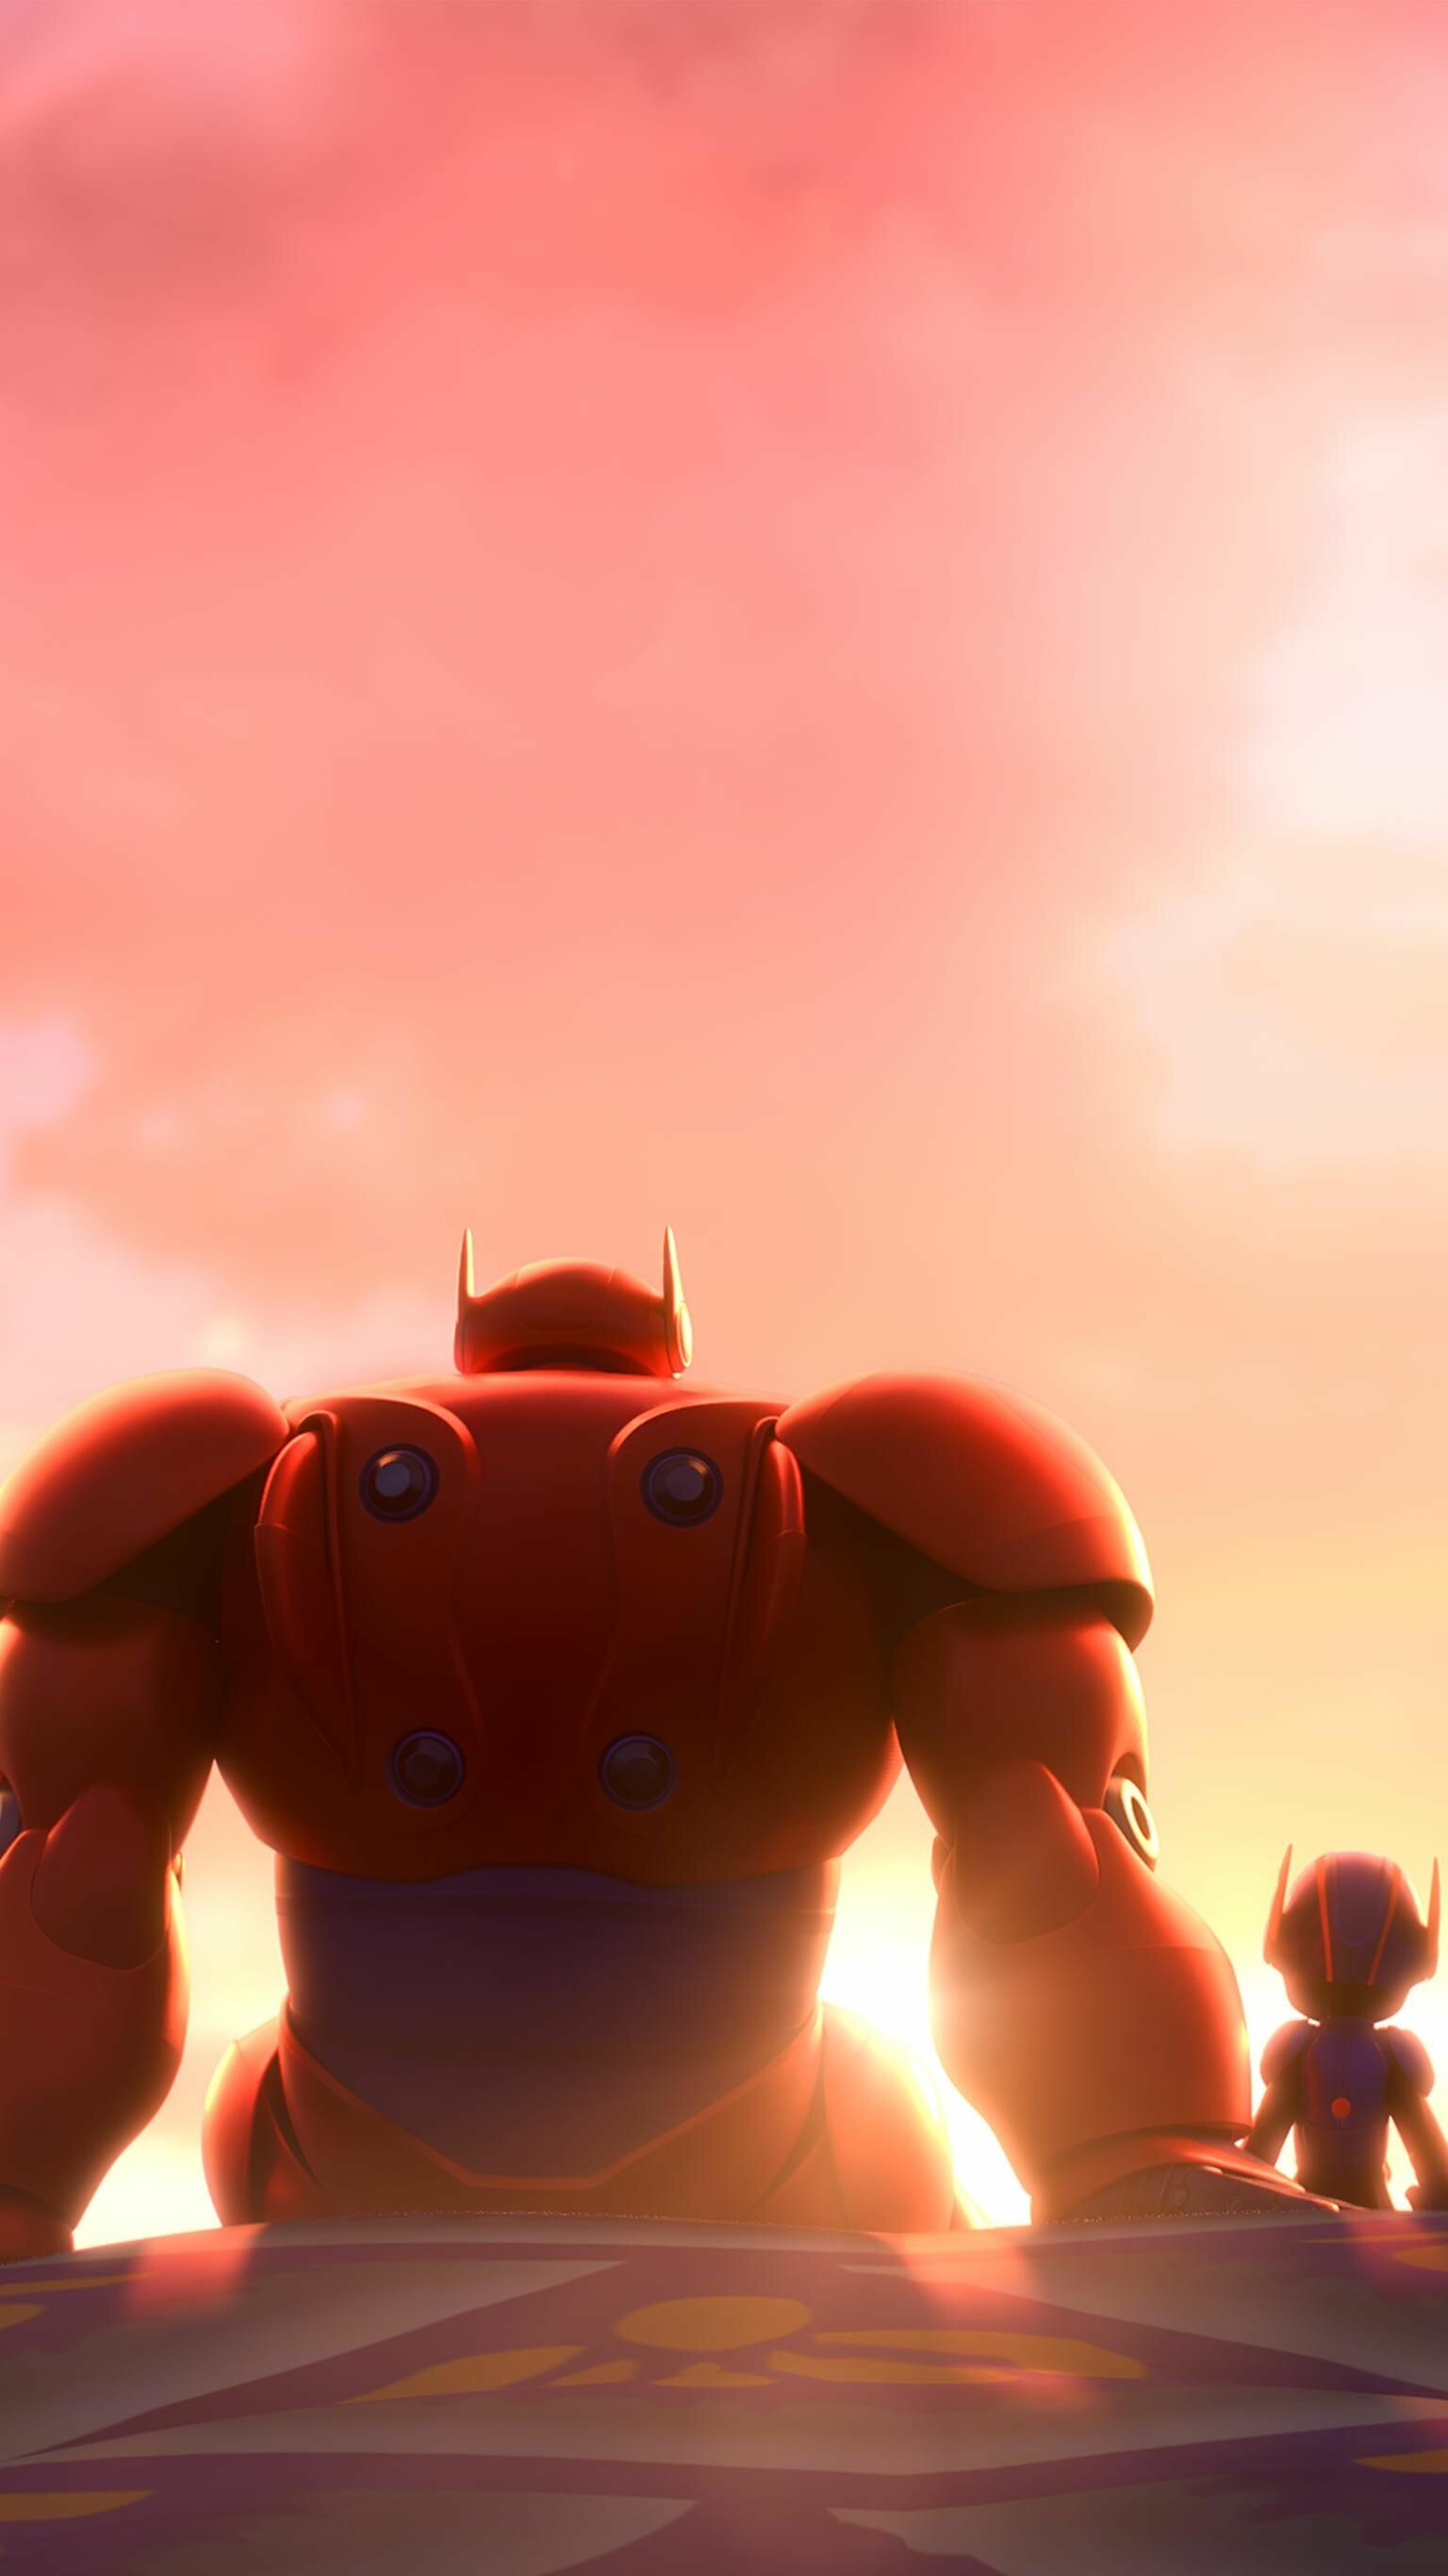 Big Hero 6: An animated action comedy science fiction movie released by Walt Disney Animation Studios. 1540x2740 HD Background.